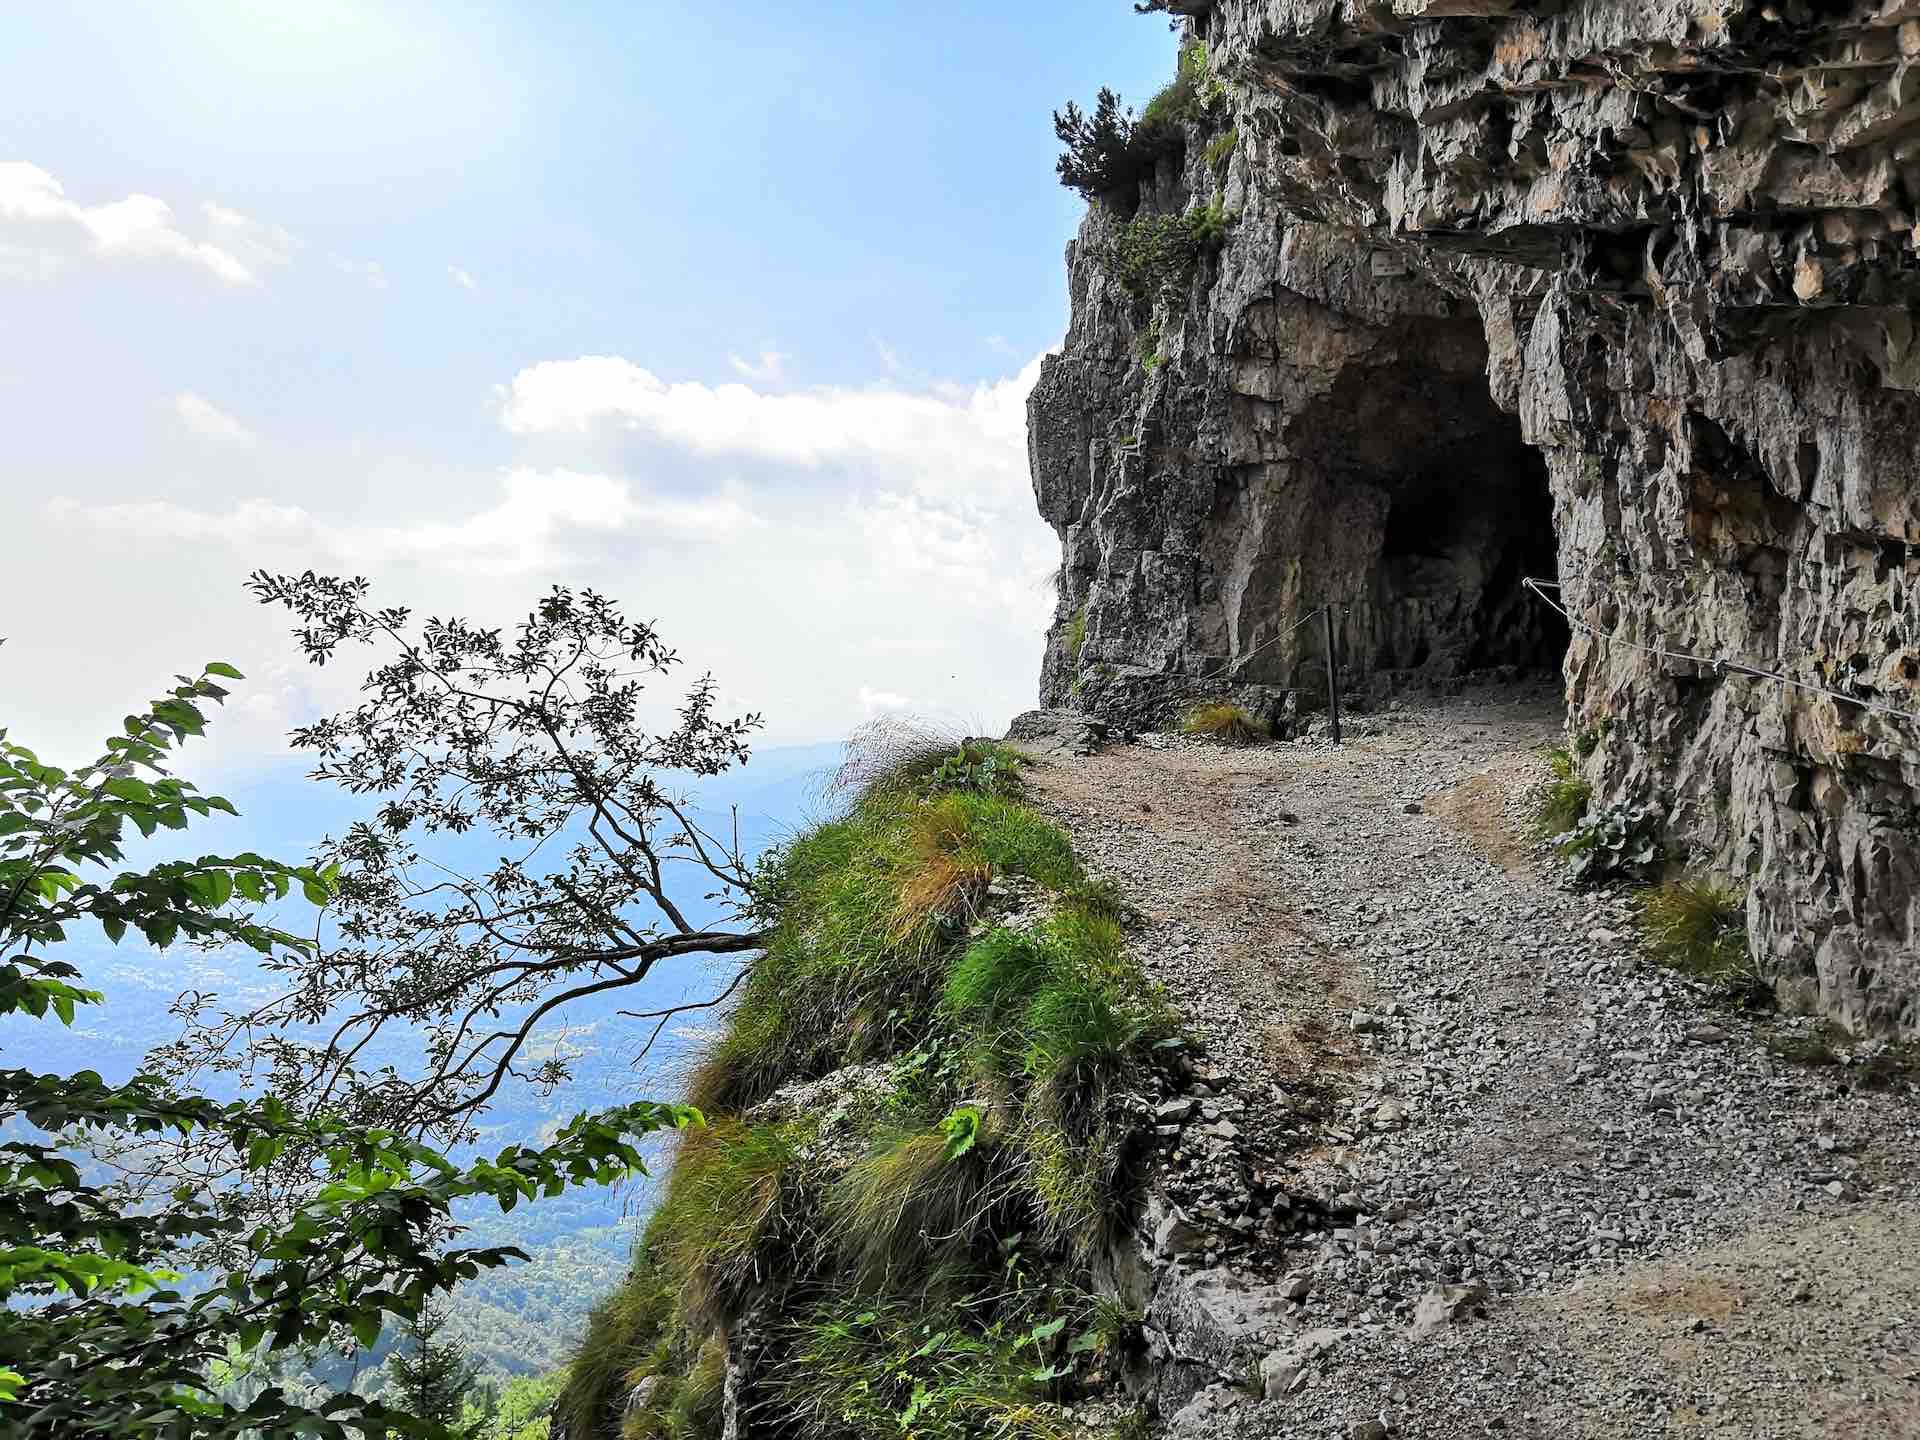 A cliffside path leading to a tunnel in the side of the mountain